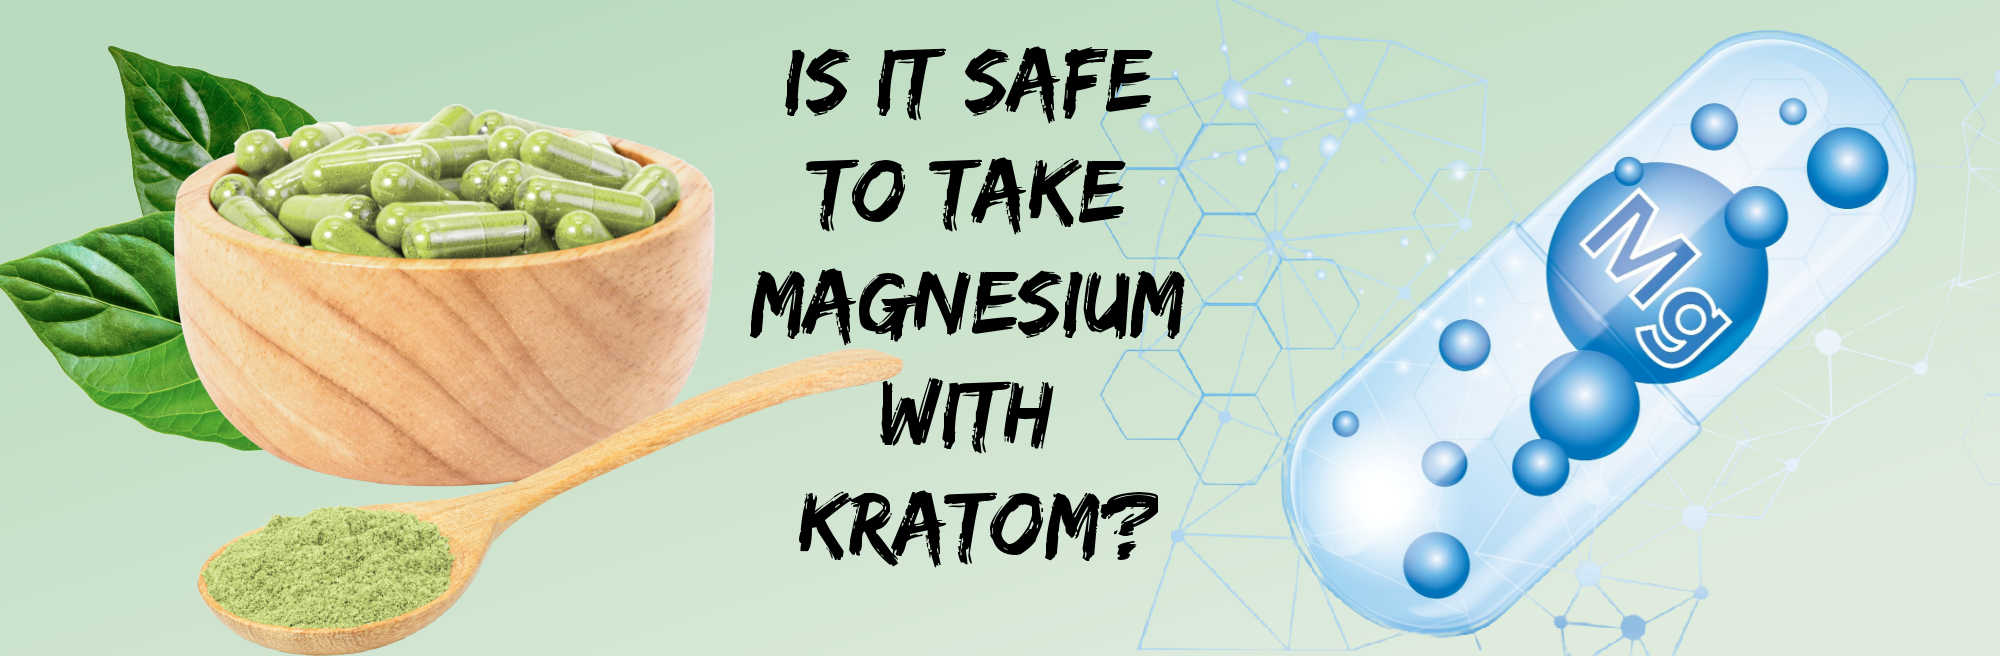 image of is it safe to take magnesium with kratom